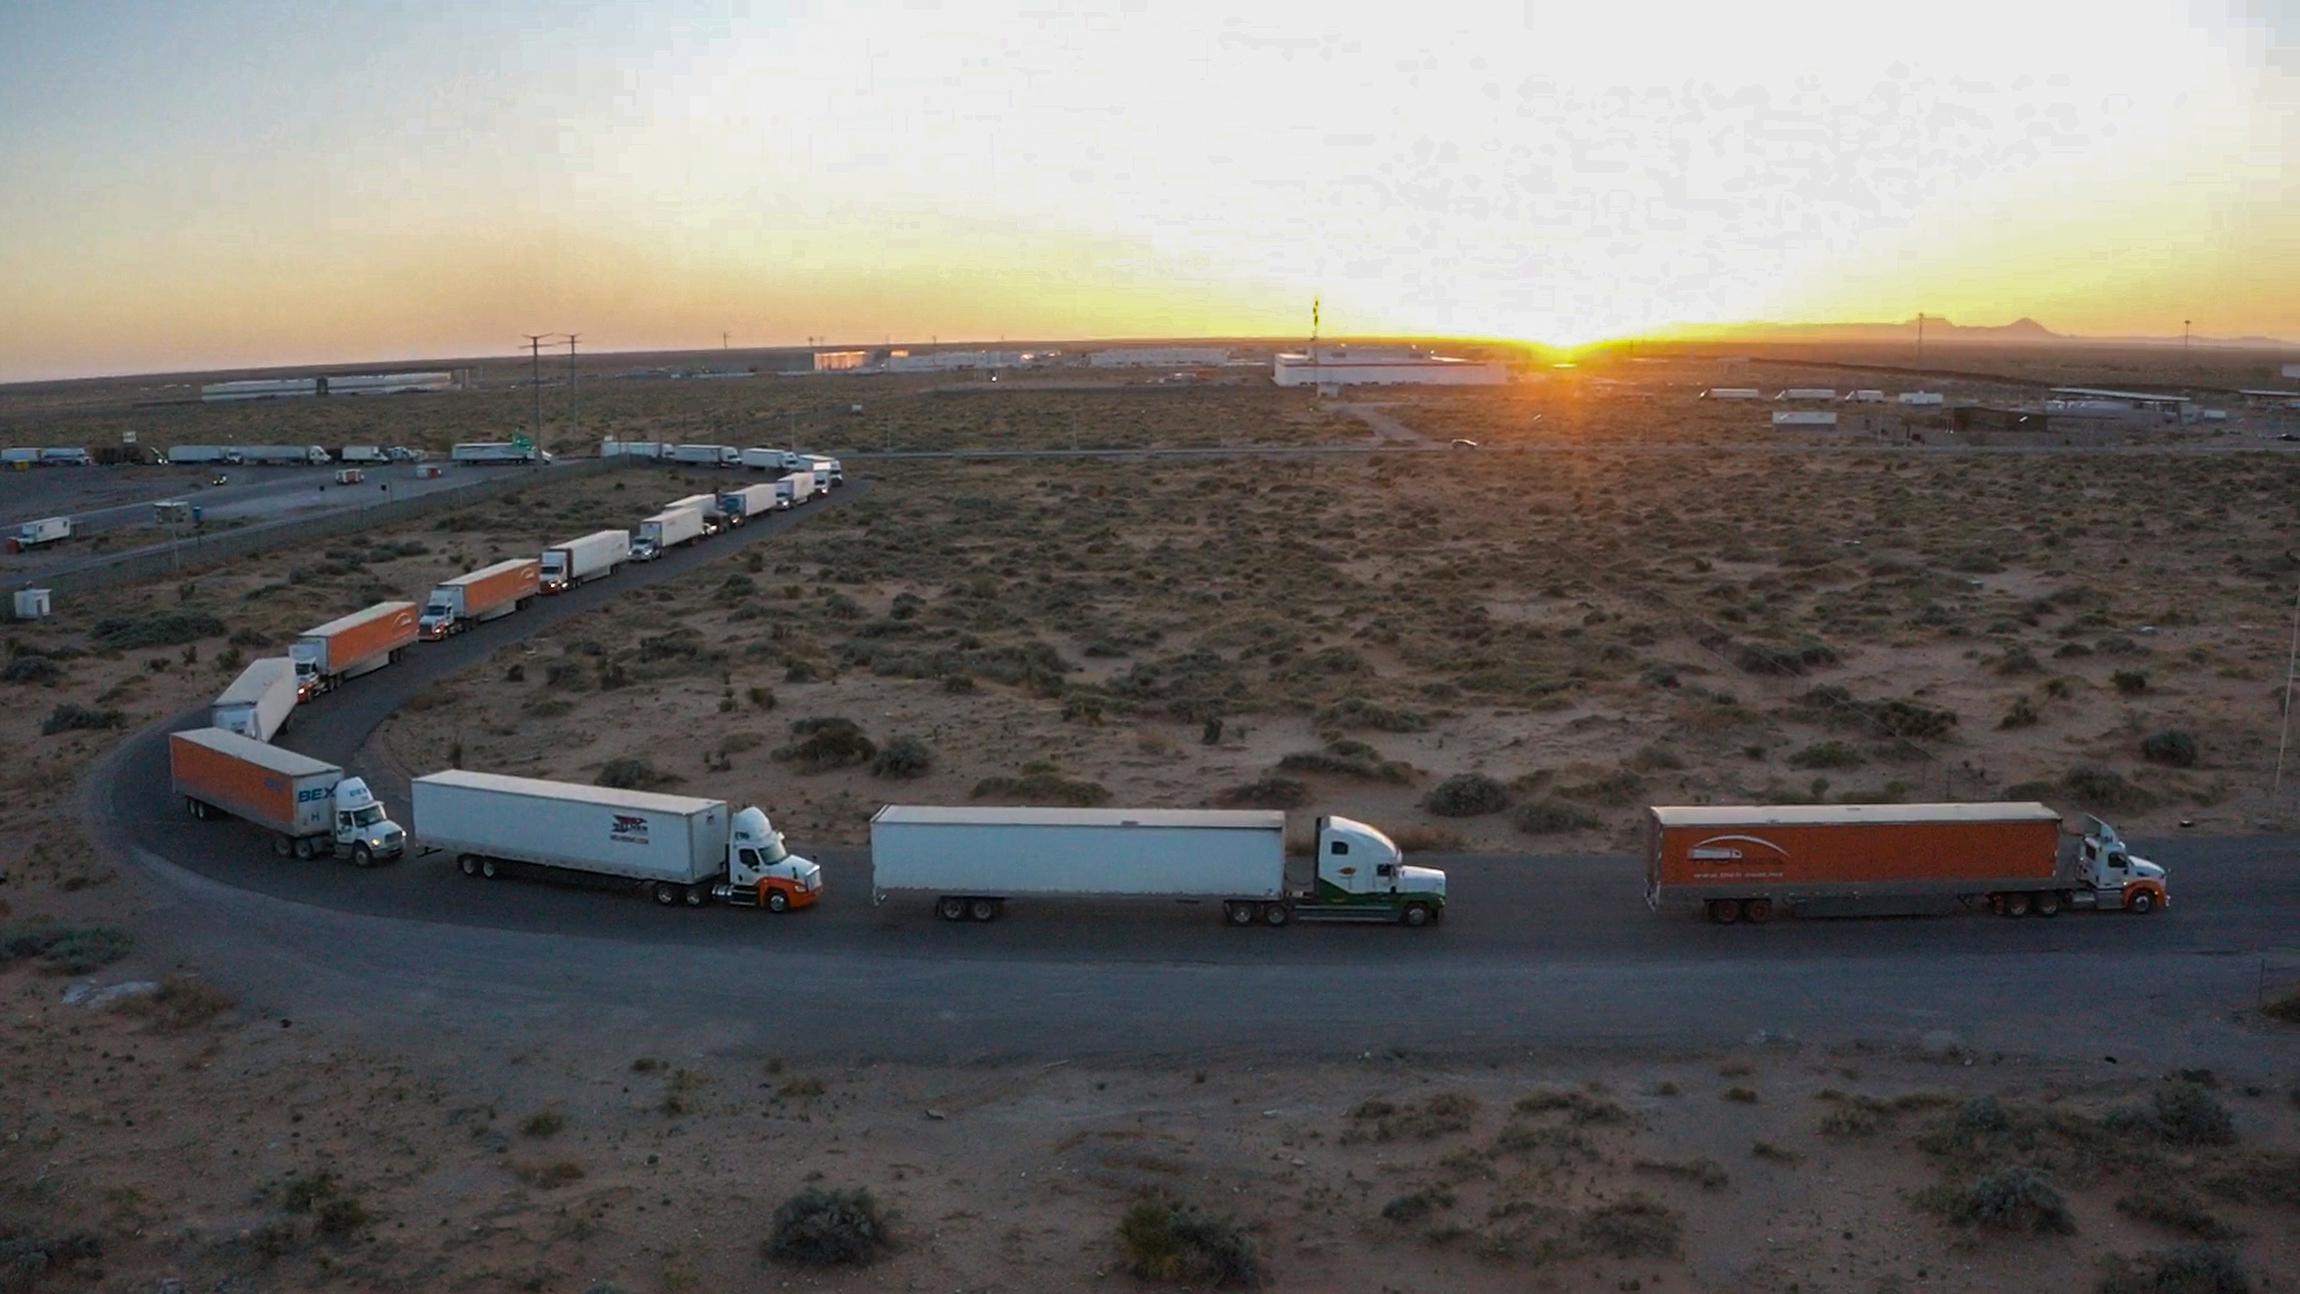 Texas halts truck inspections that caused border gridlock – The Associated Press